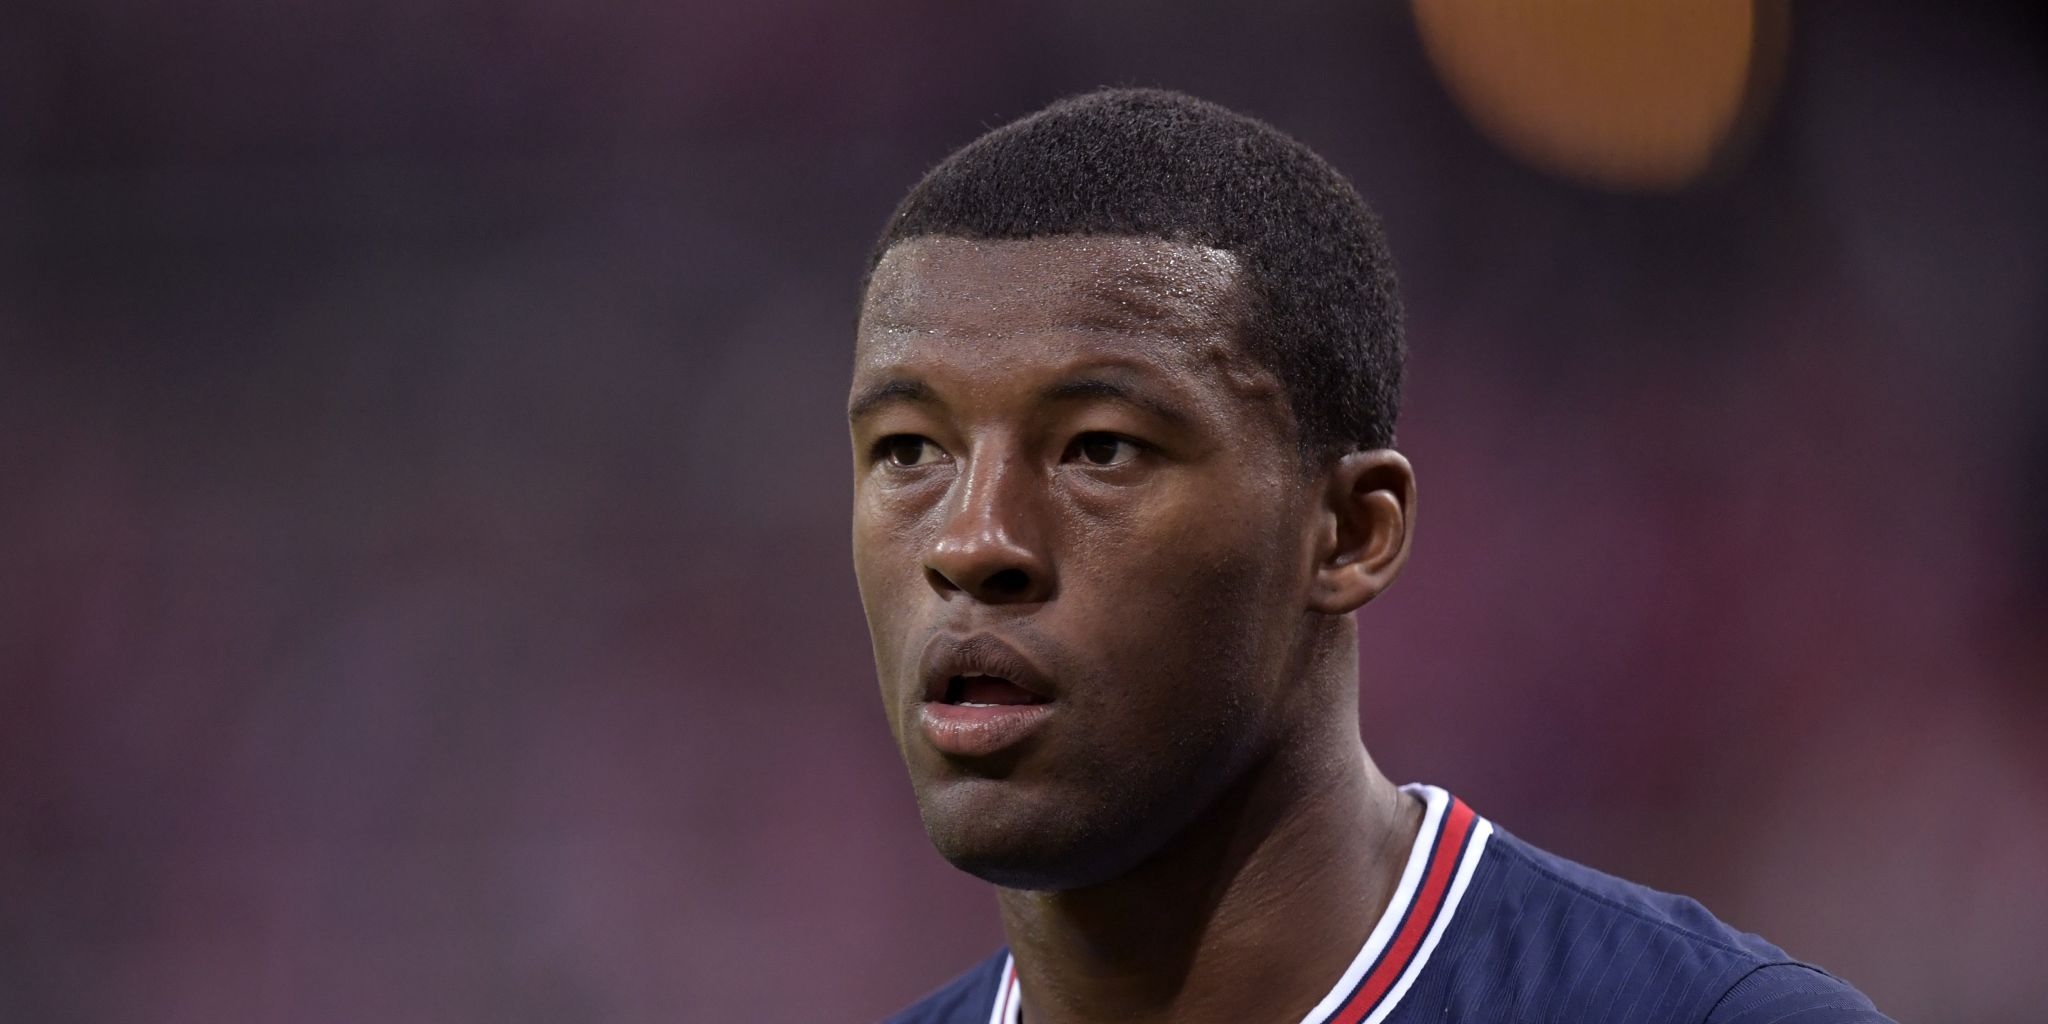 Wijnaldum fires second shot at Liverpool after reaffirming prior ‘desire to stay’ at Anfield